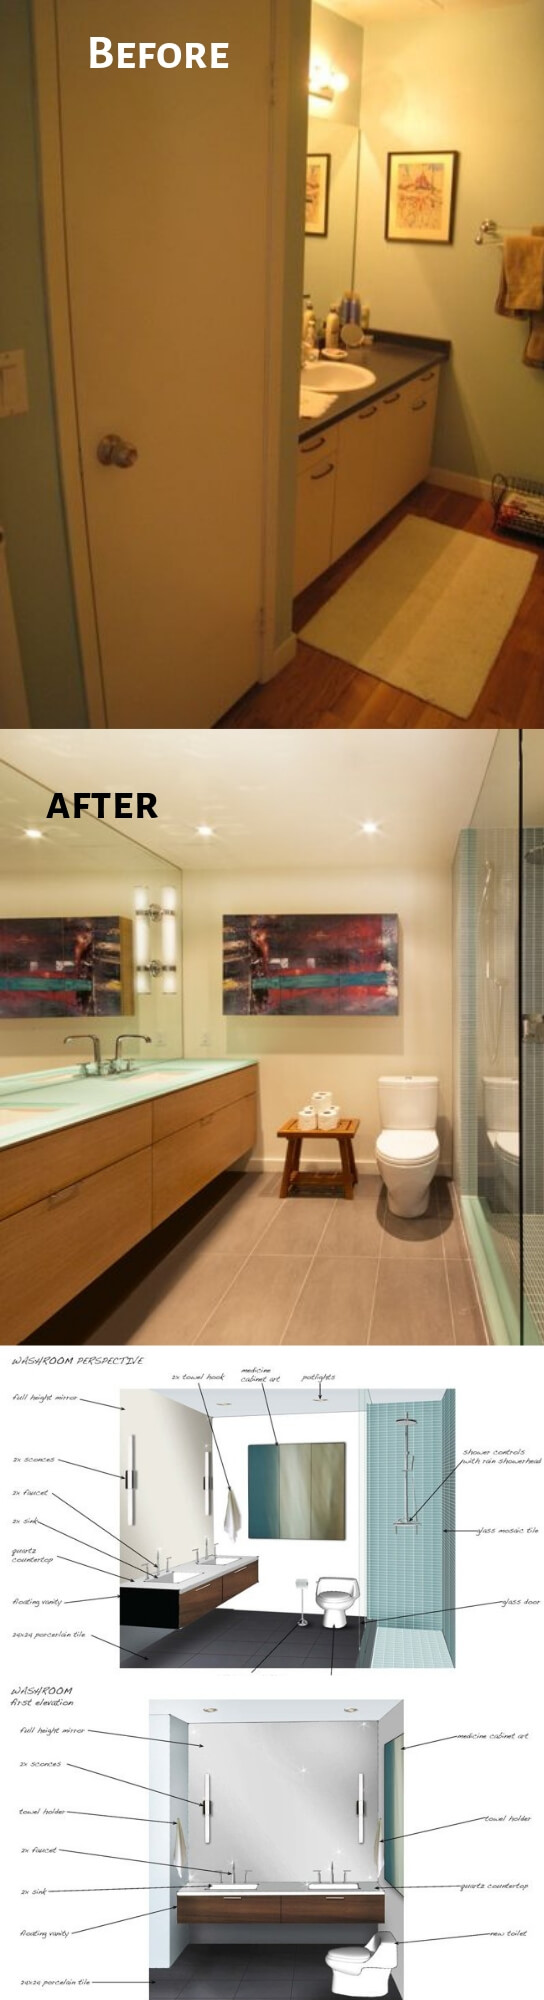 Artistic Remodel for a Bathroom